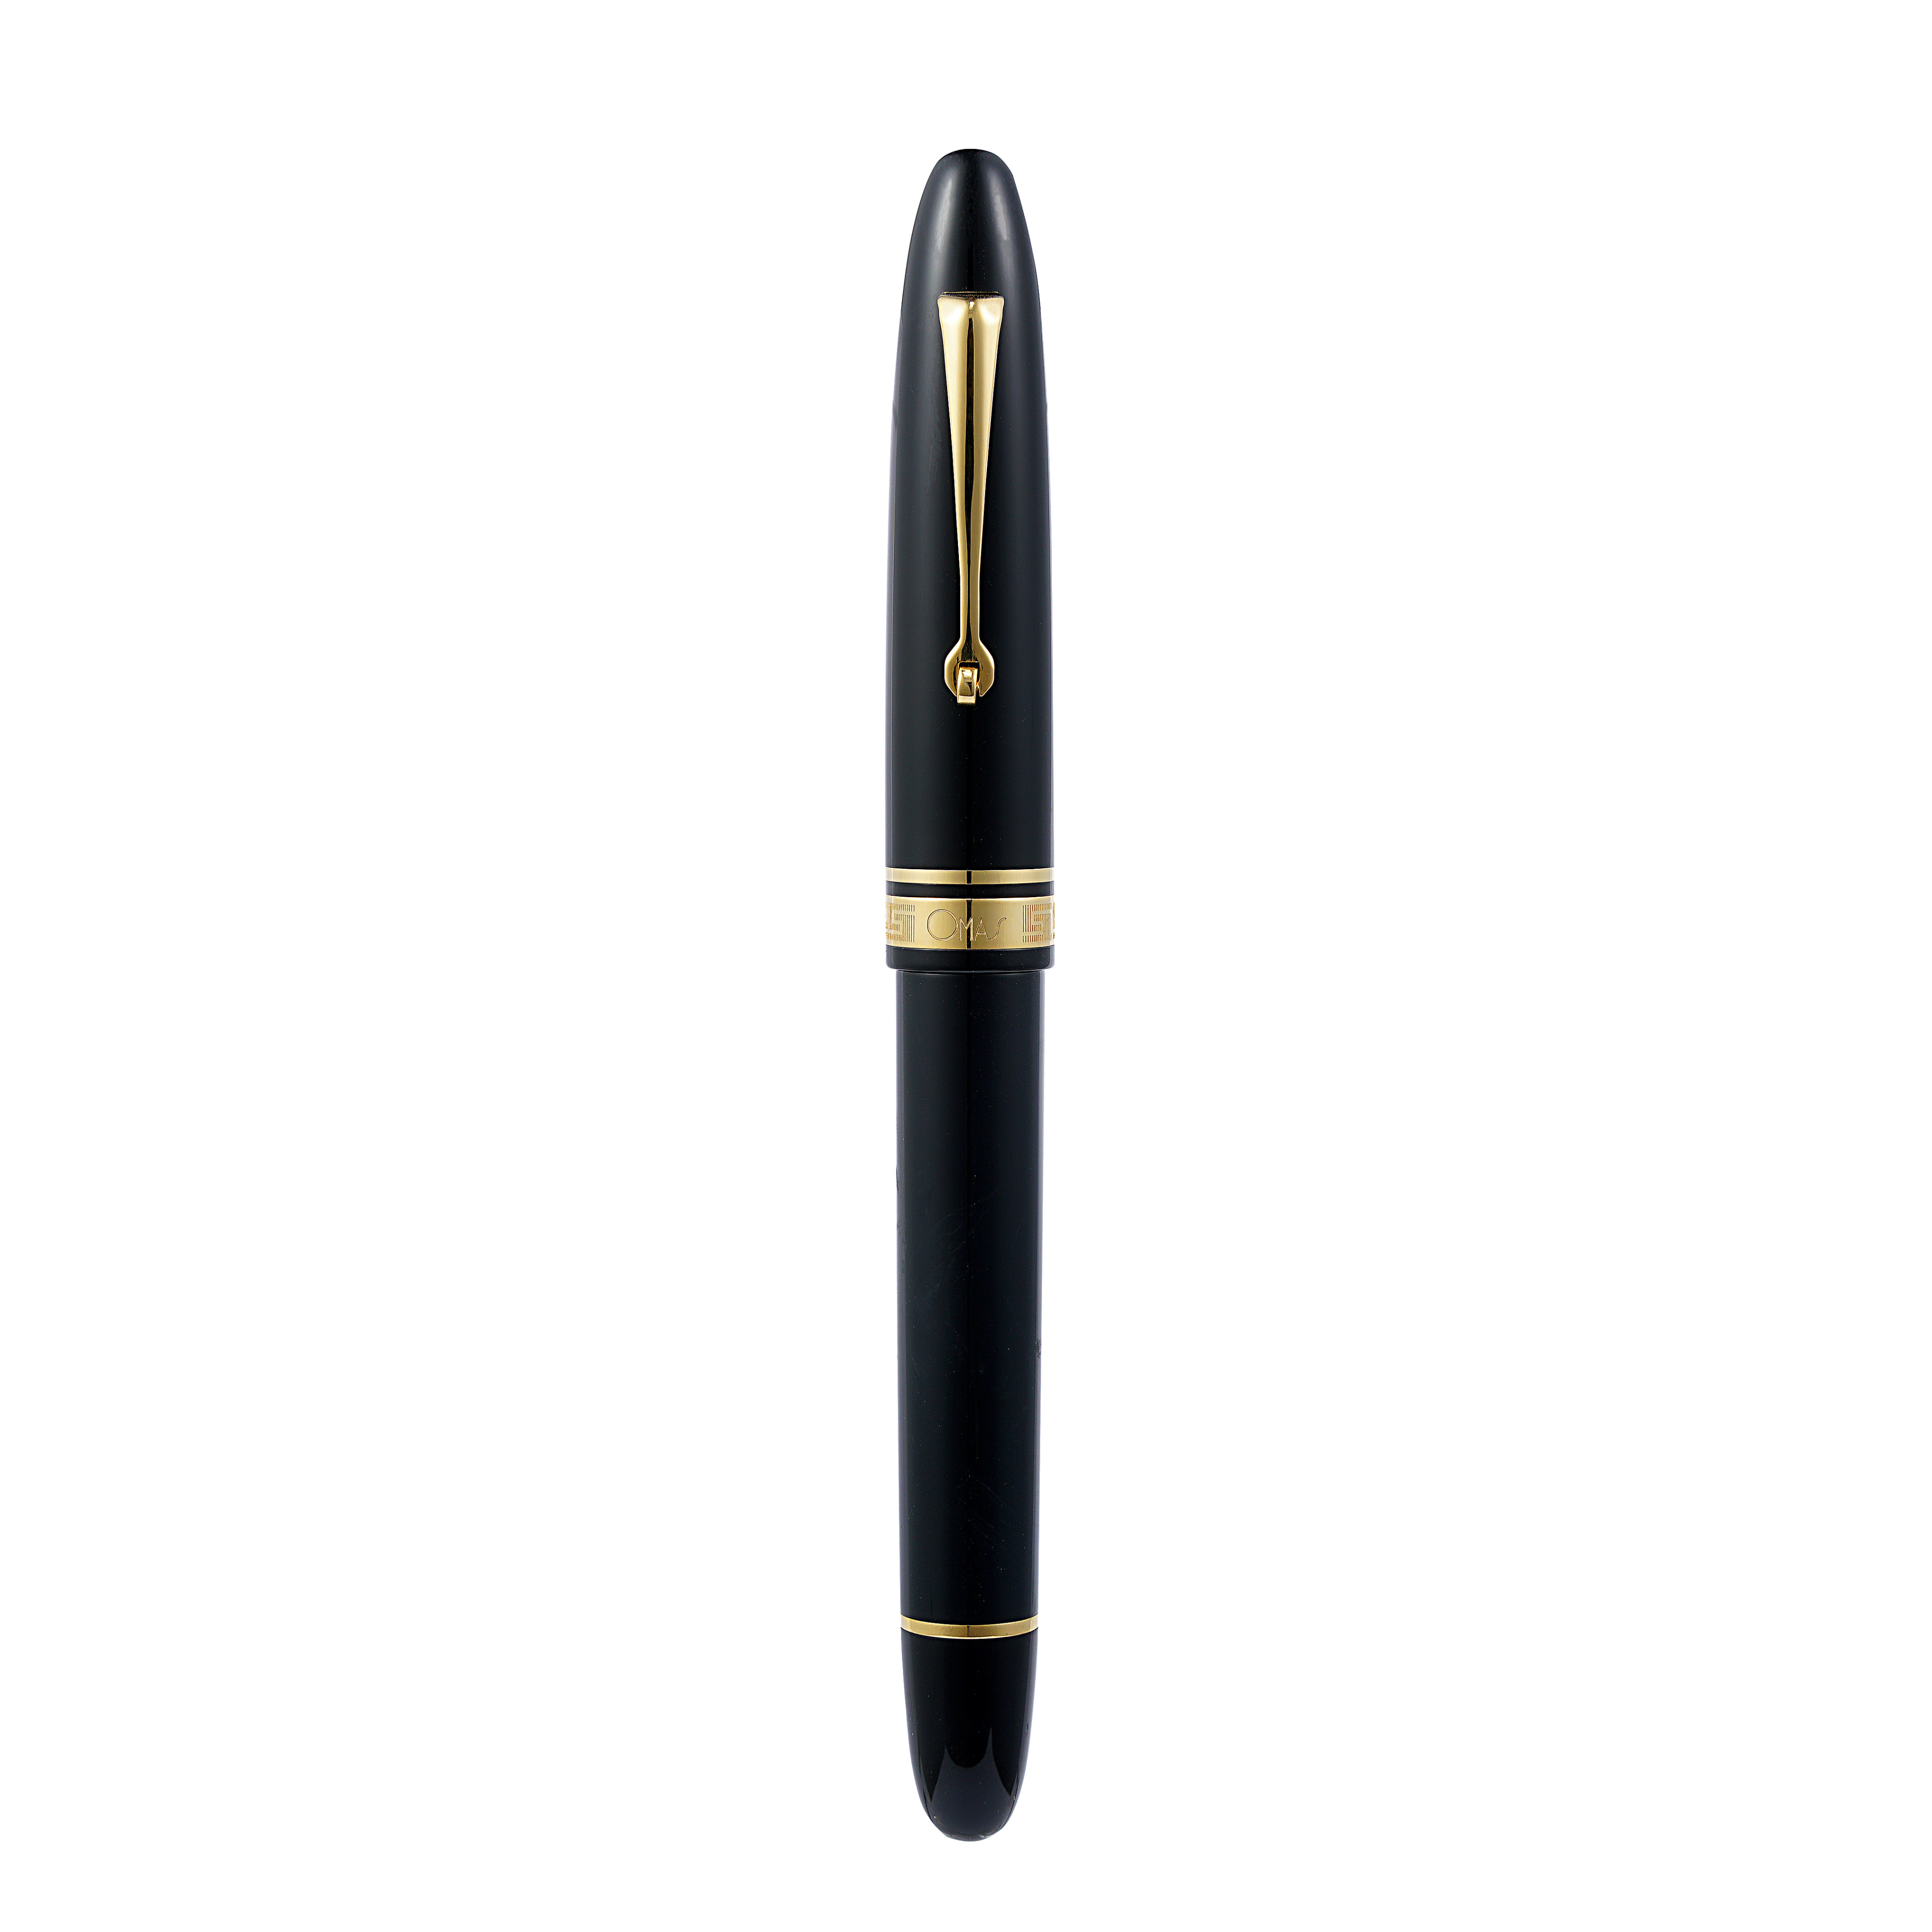 Omas Ogiva Fountain Pen in Nera with Gold Trim